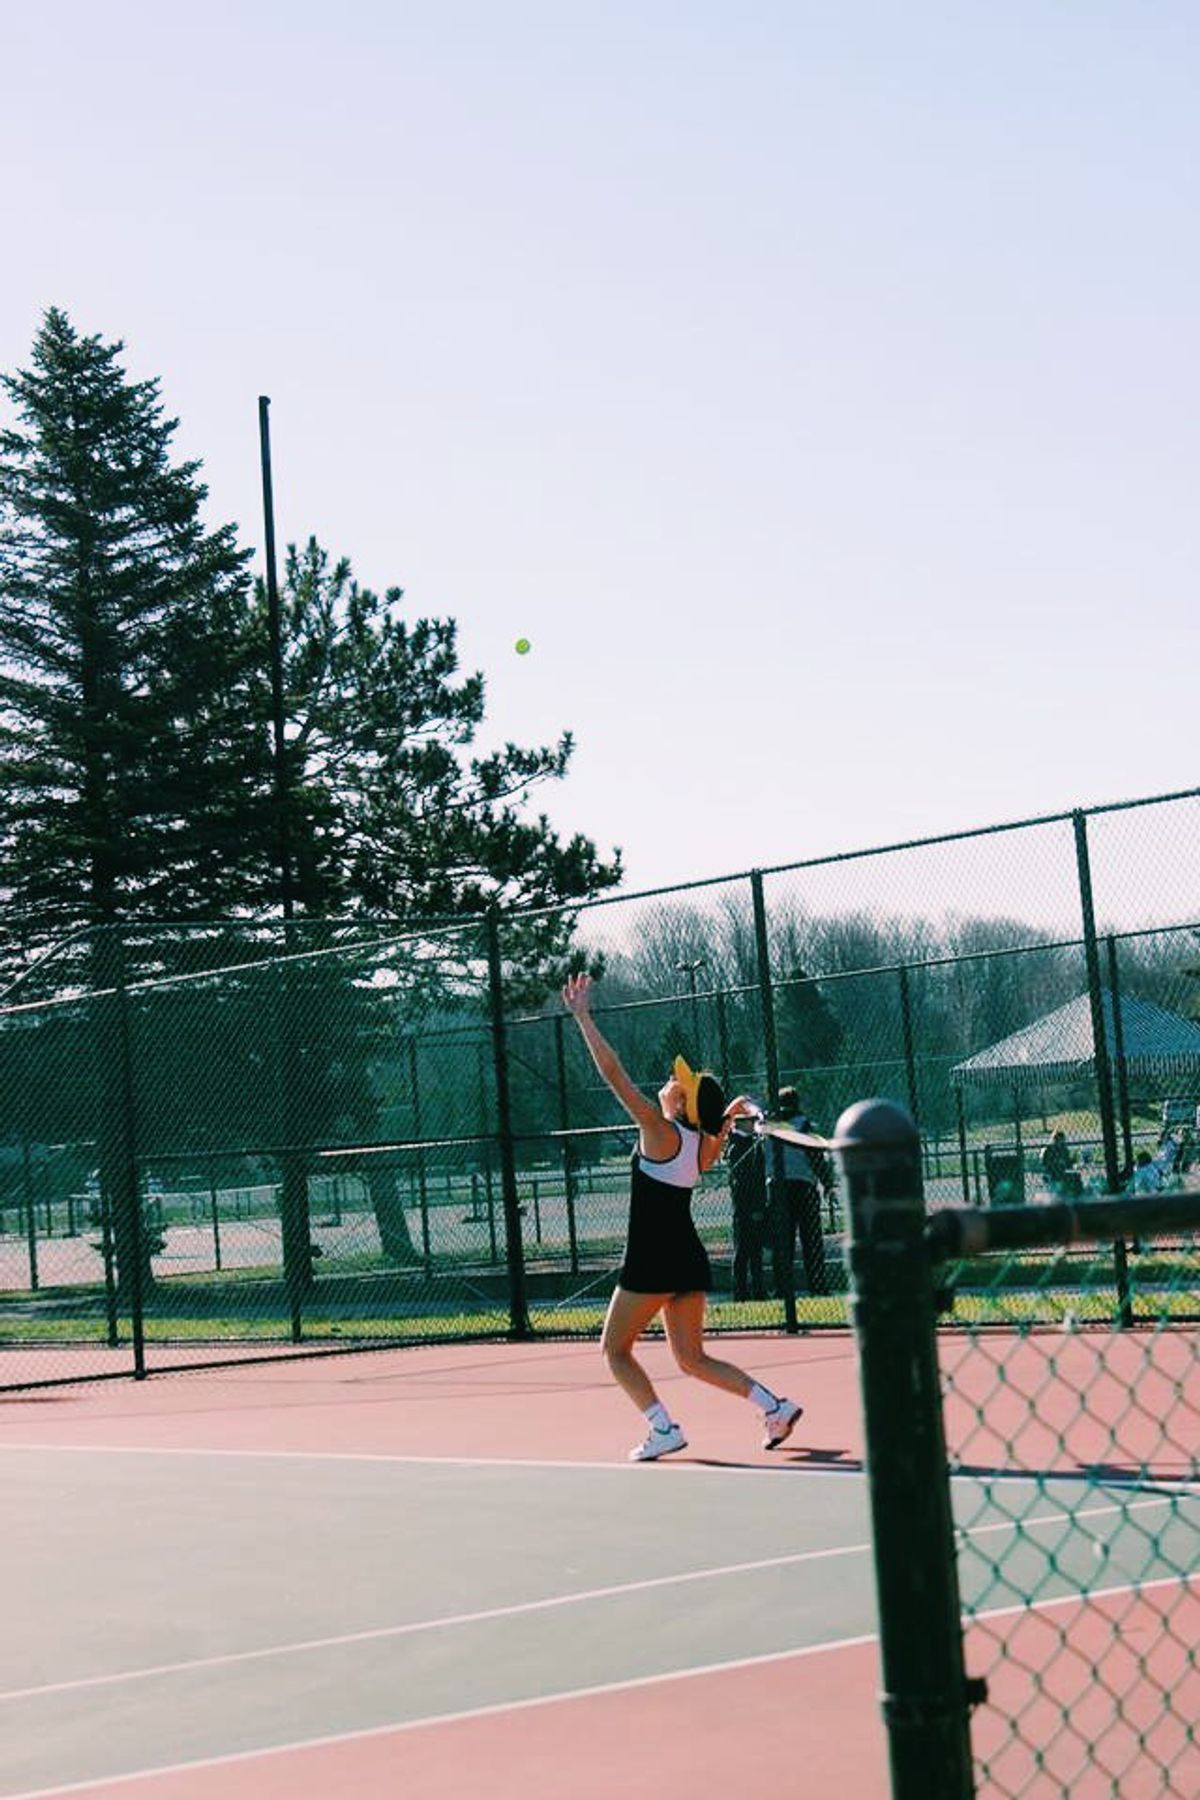 5 Of The Hardest Things About Tennis